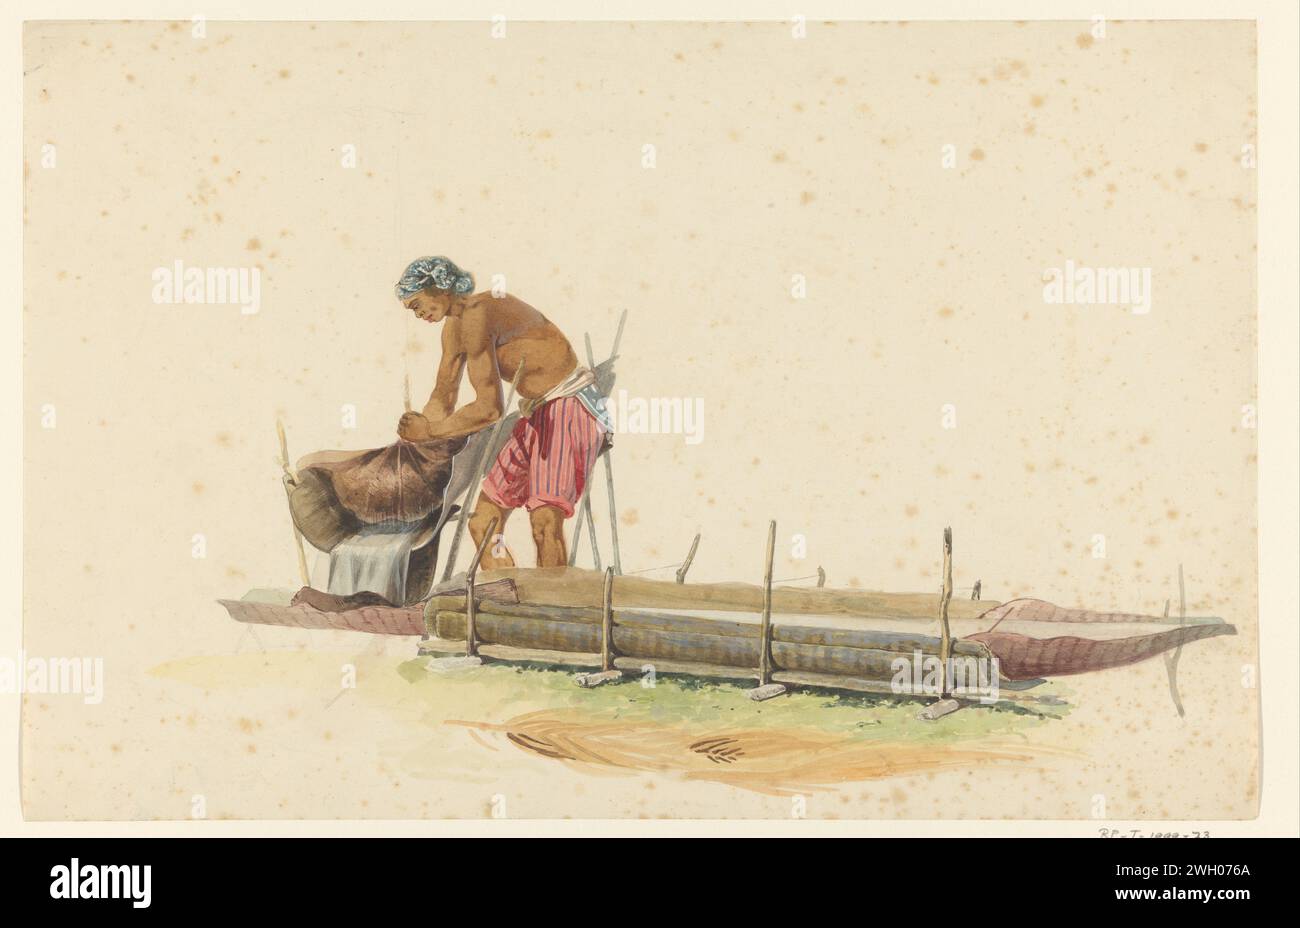 Man busy processing the marrow of the sagopalm to flour, Ernest Alfred Hardouin, c. 1837 - c. 1854 drawing Man busy processing the marrow of the sagopalm to flour, with water in a hollowed -out sagopalm stem.  paper. pencil. watercolor (paint) brush Stock Photo